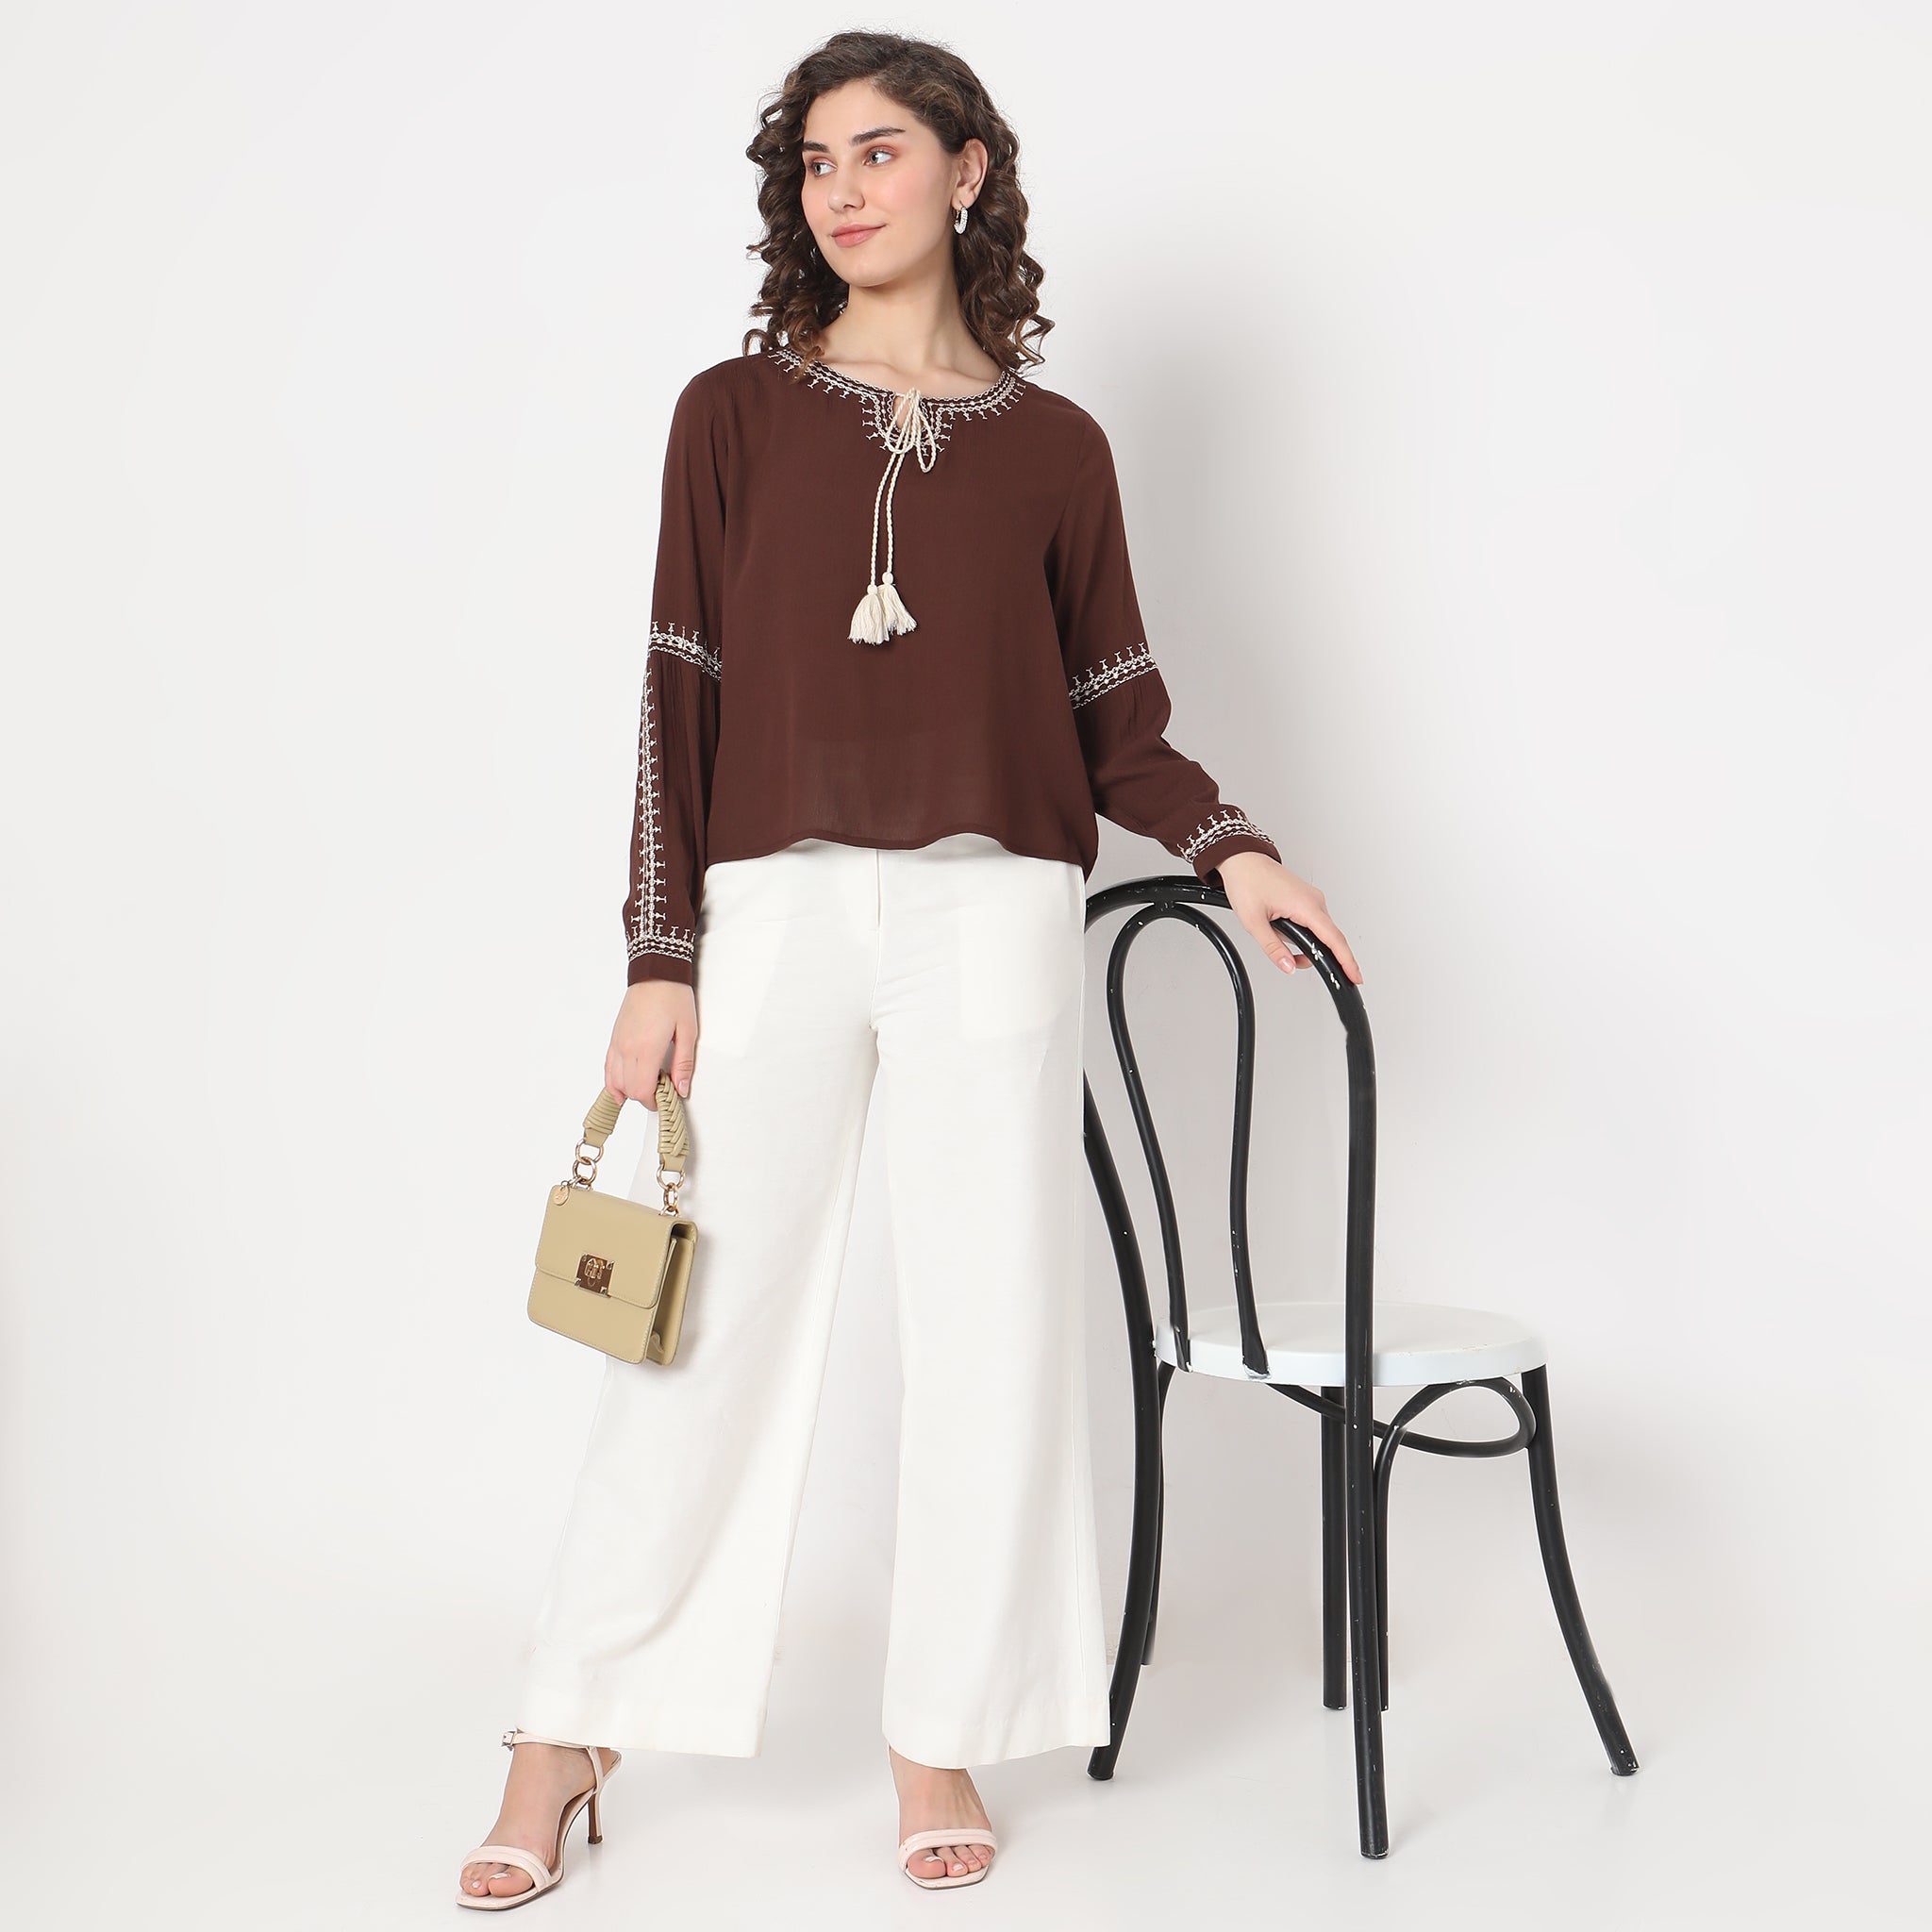 Buy Stylish Tops Online for Women in India | Style Junkiie